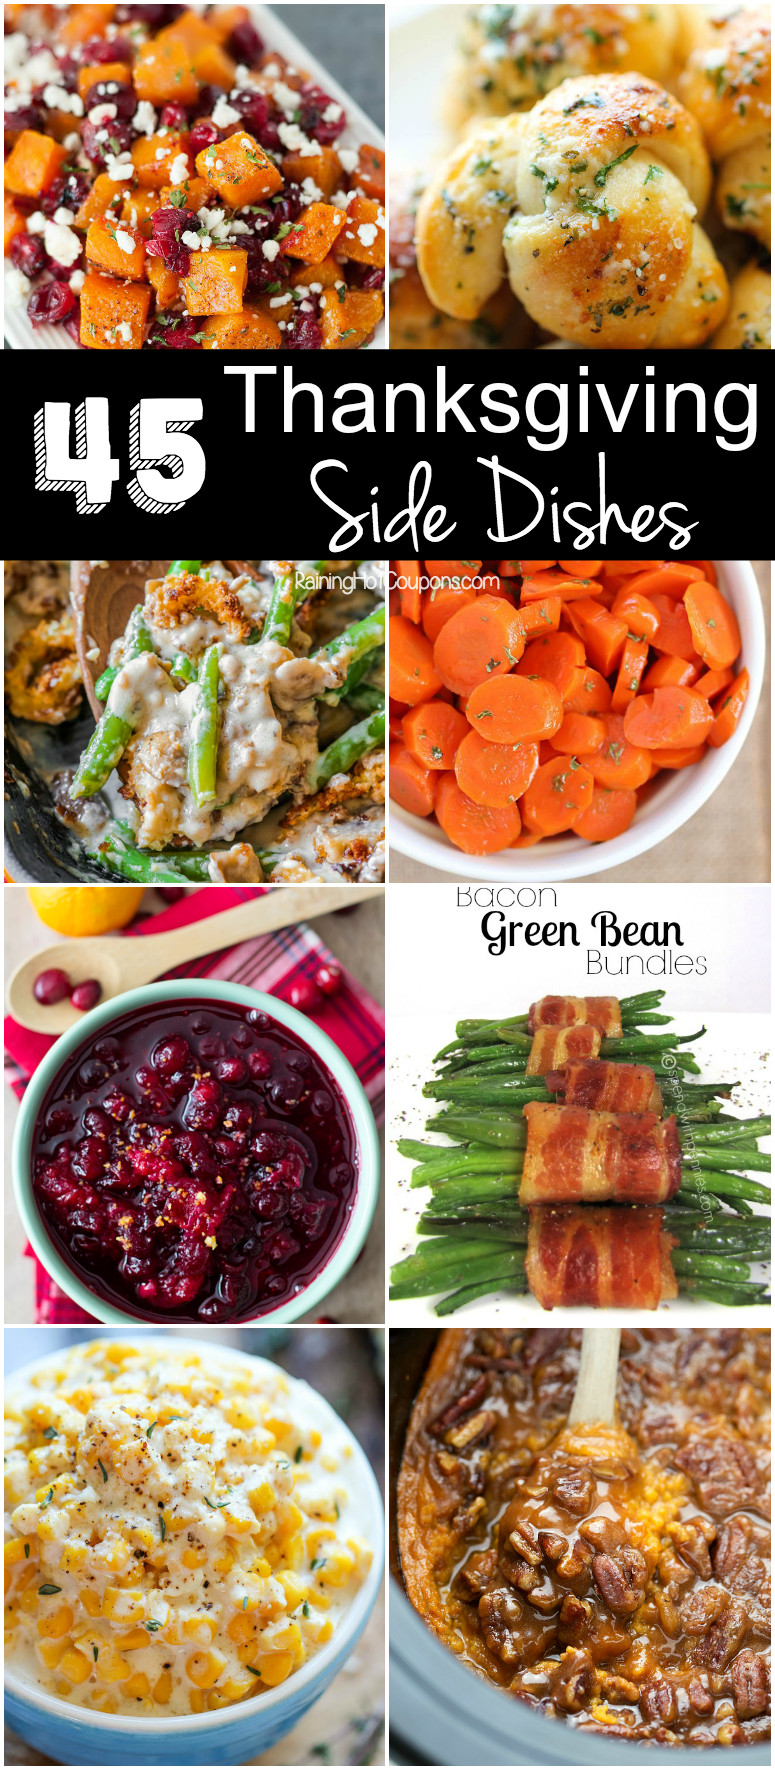 Easy Side Dishes For Thanksgiving Dinner
 45 Thanksgiving Side Dishes